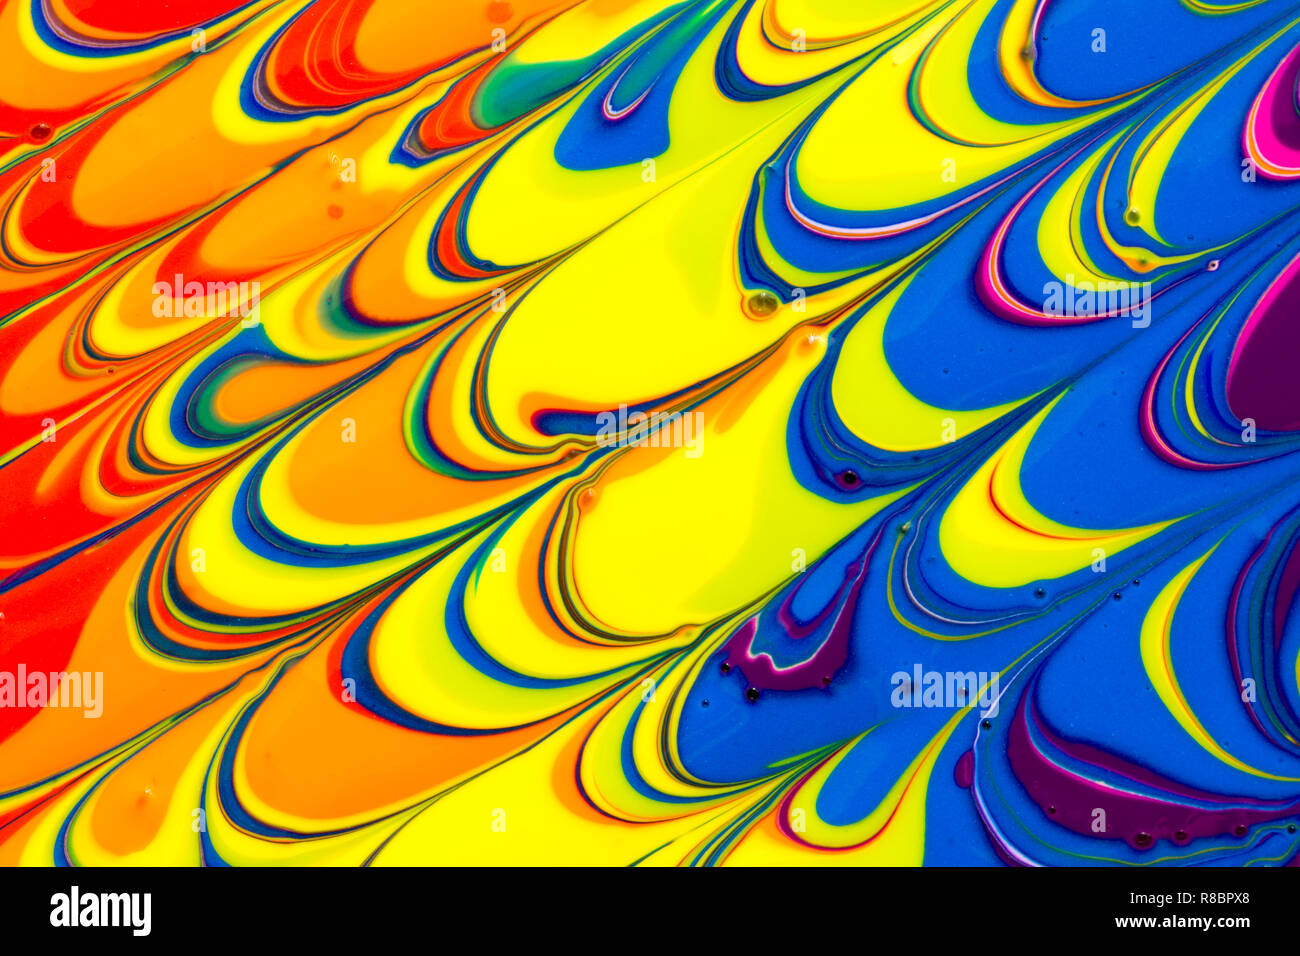 A colourful multicoloured rainbow abstract background of red, orange, yellow,  green. blue, purple, pink and white liquid paint swirls Stock Photo - Alamy